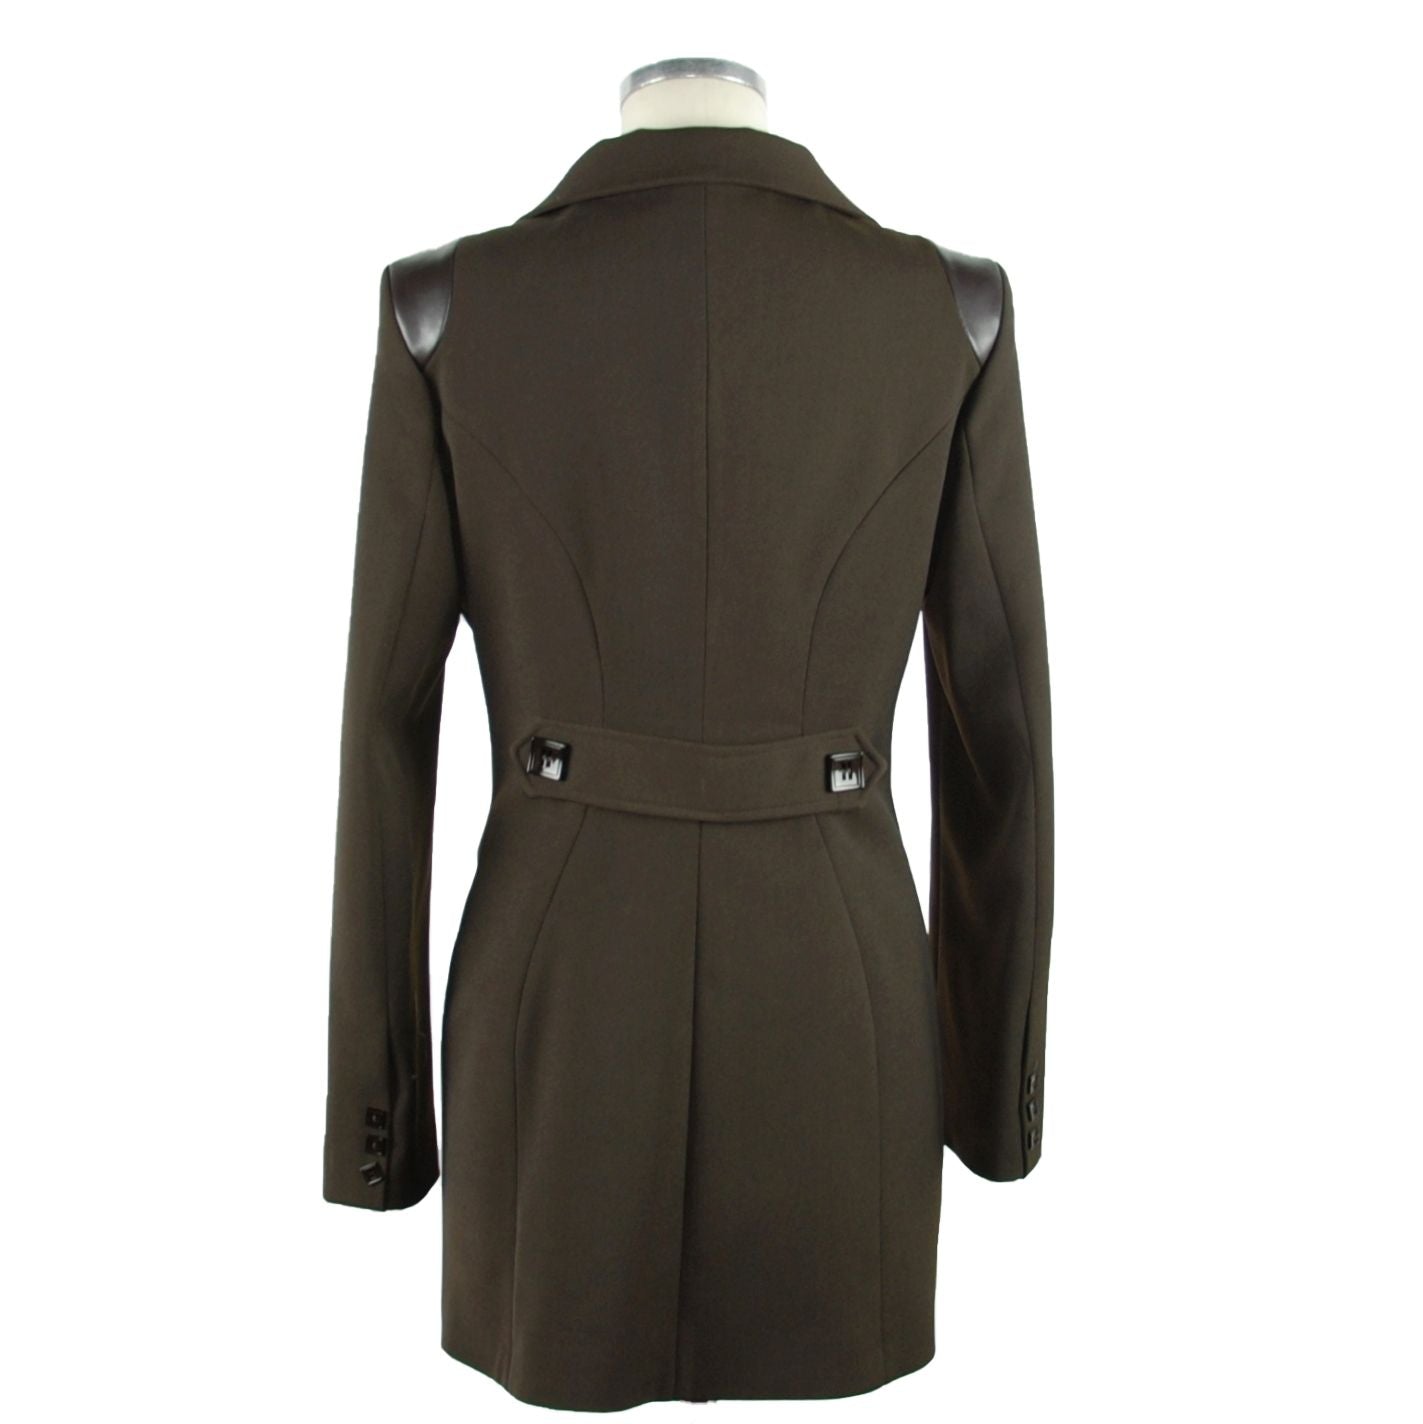 Elegant Brown Overcoat with Button Closure